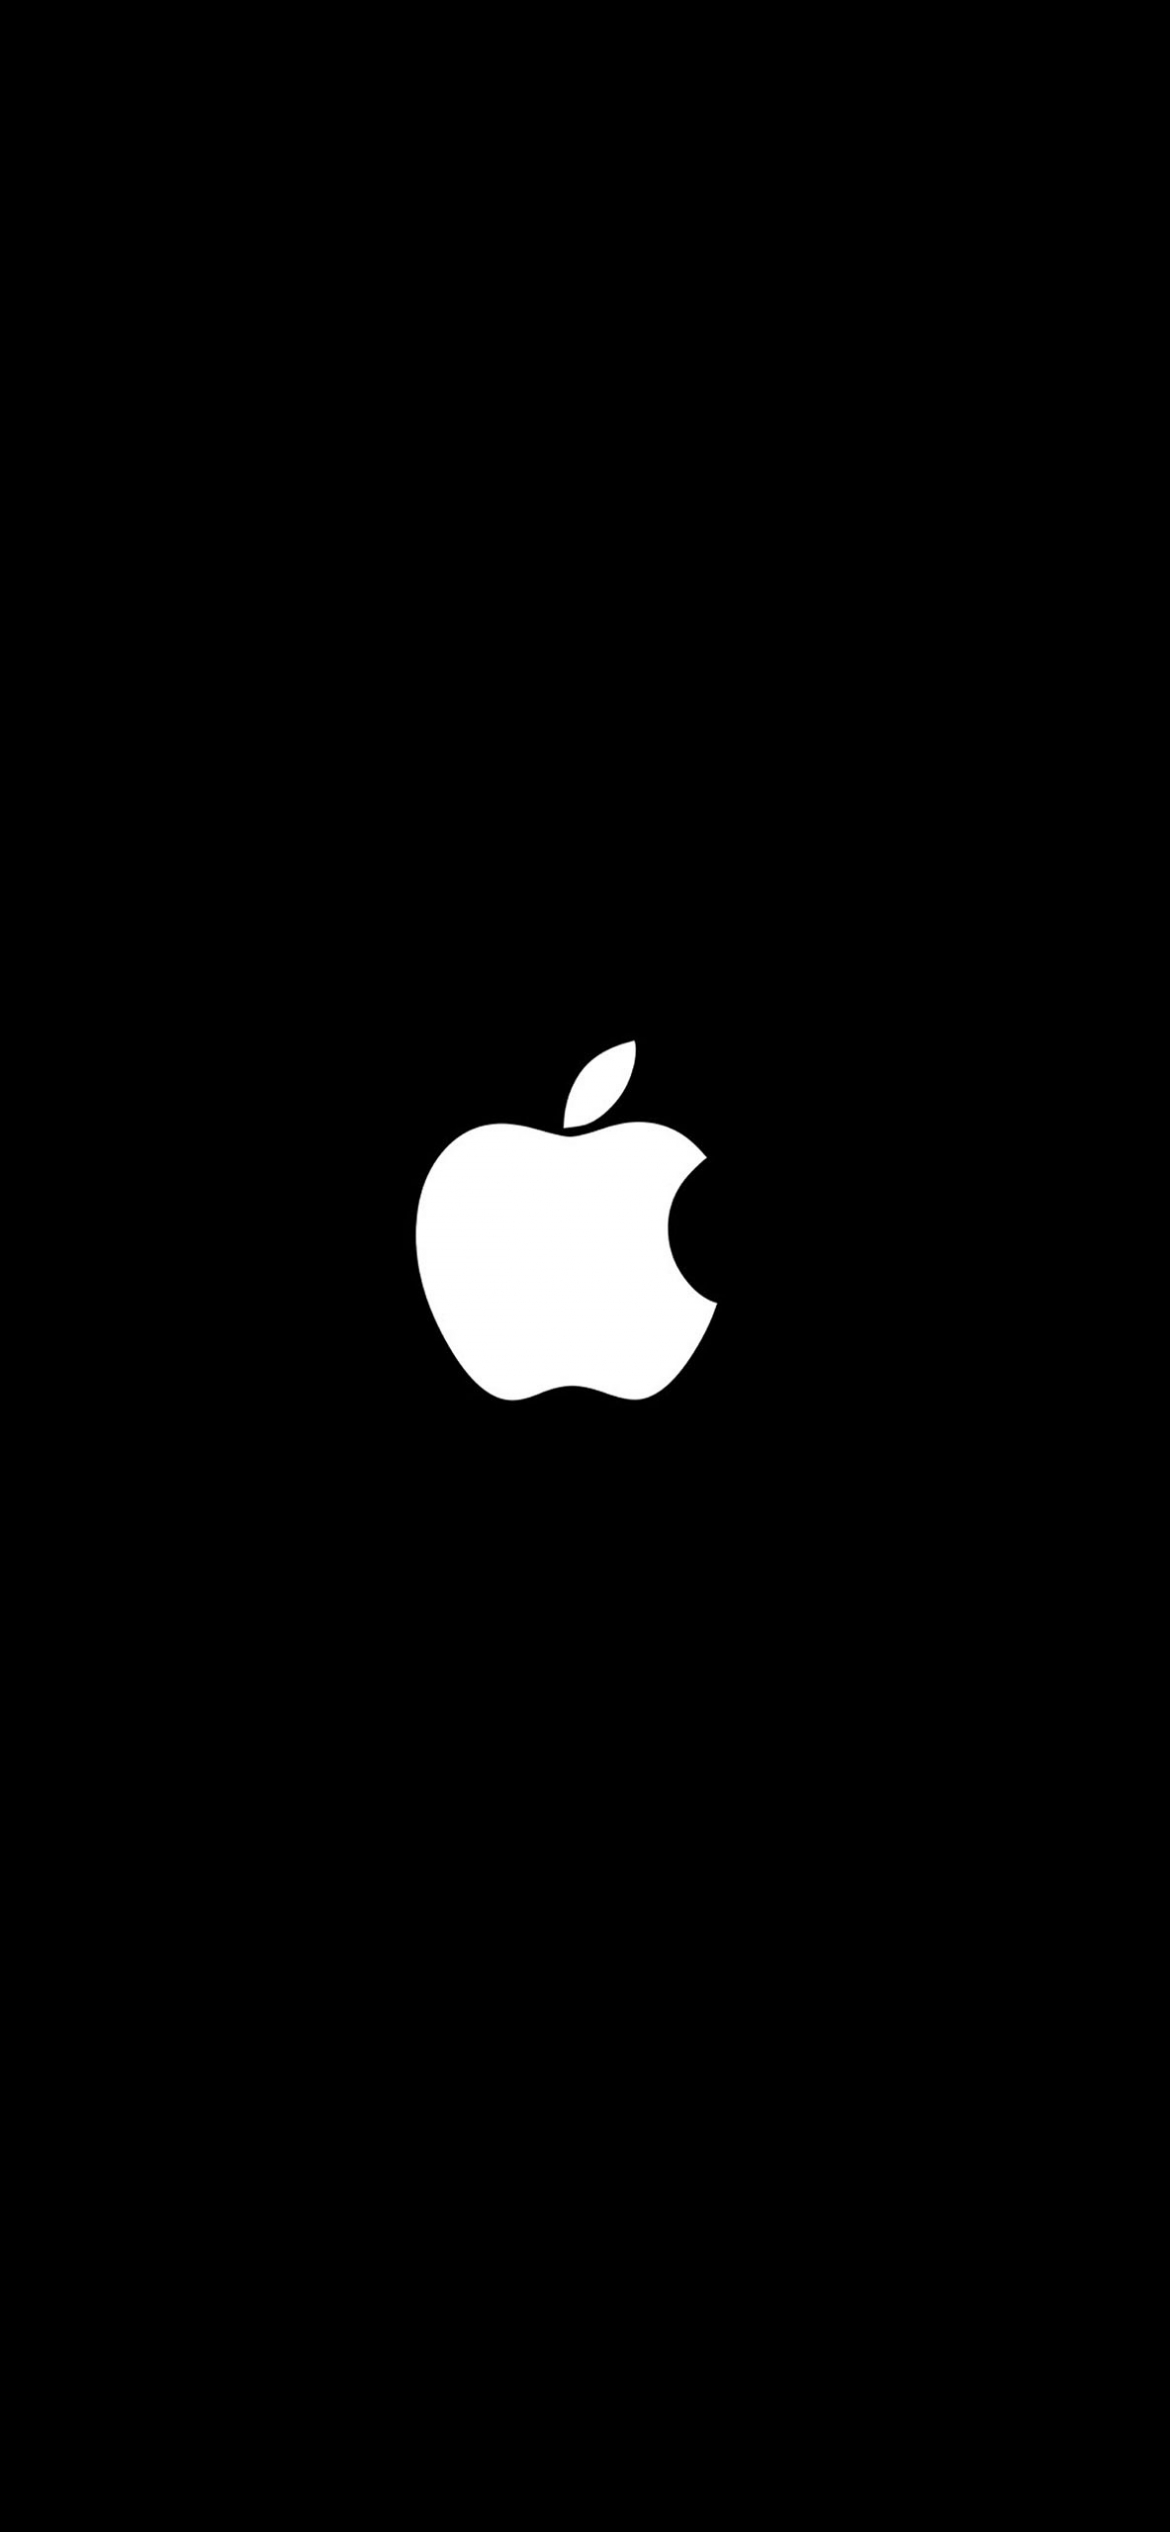 Download A Simple Apple Logo - Black and White Wallpaper - GetWalls.io